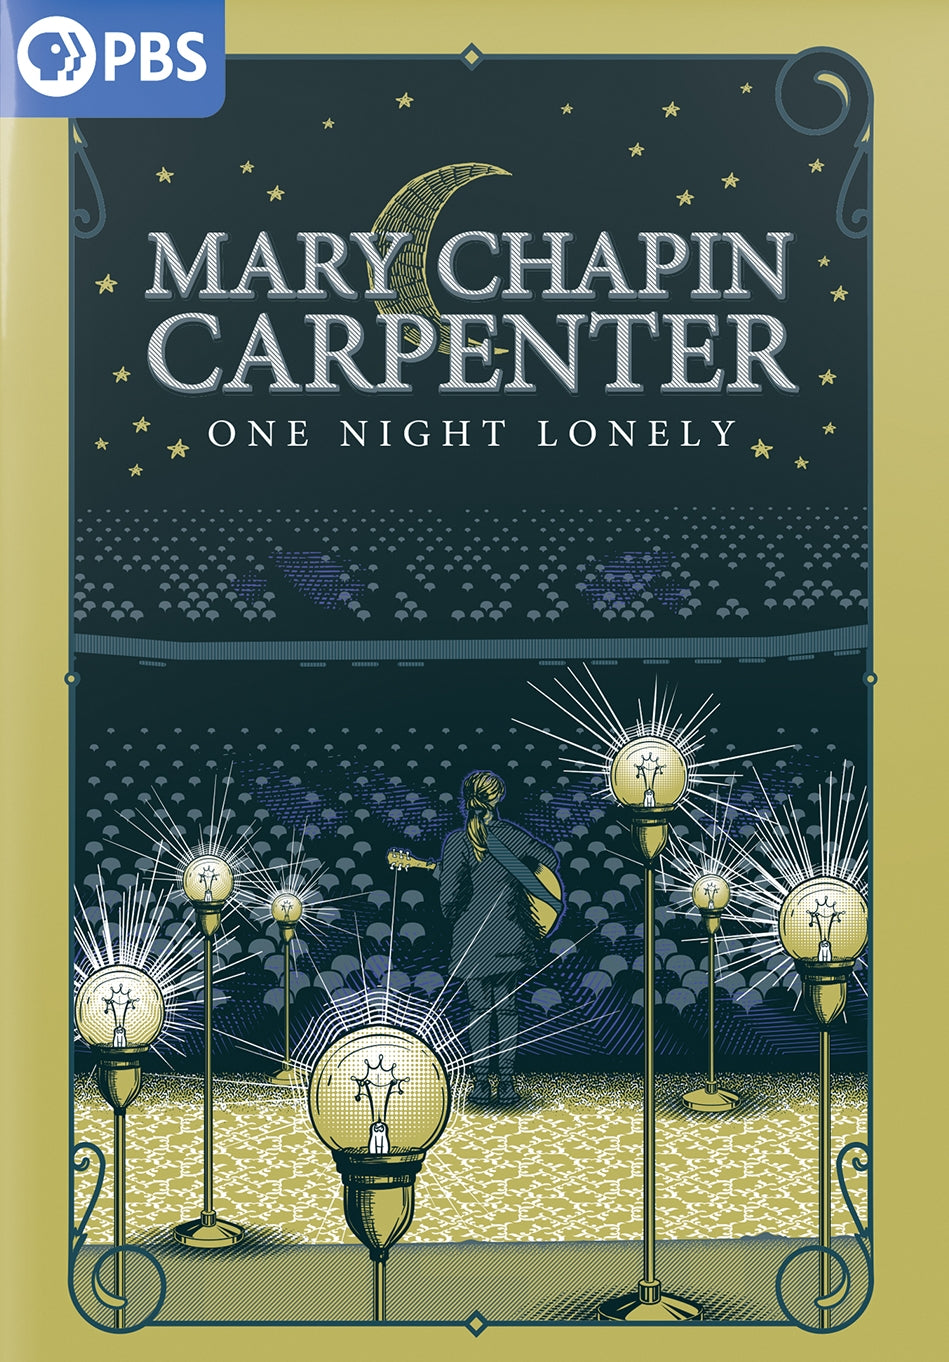 Mary Chapin Carpenter - One Night Lonely cover art